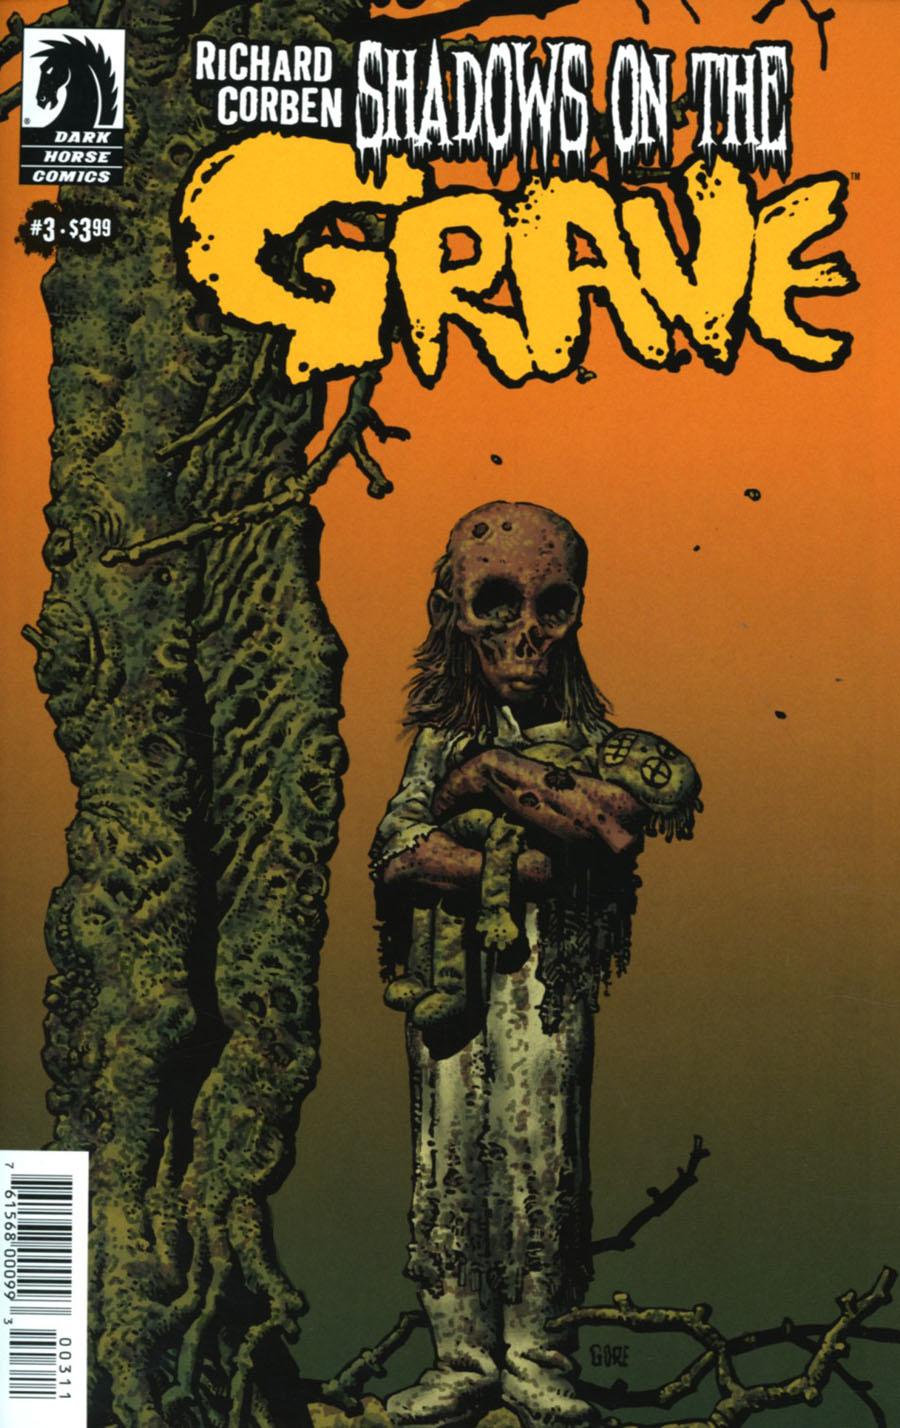 Shadows On The Grave Vol. 1 #3